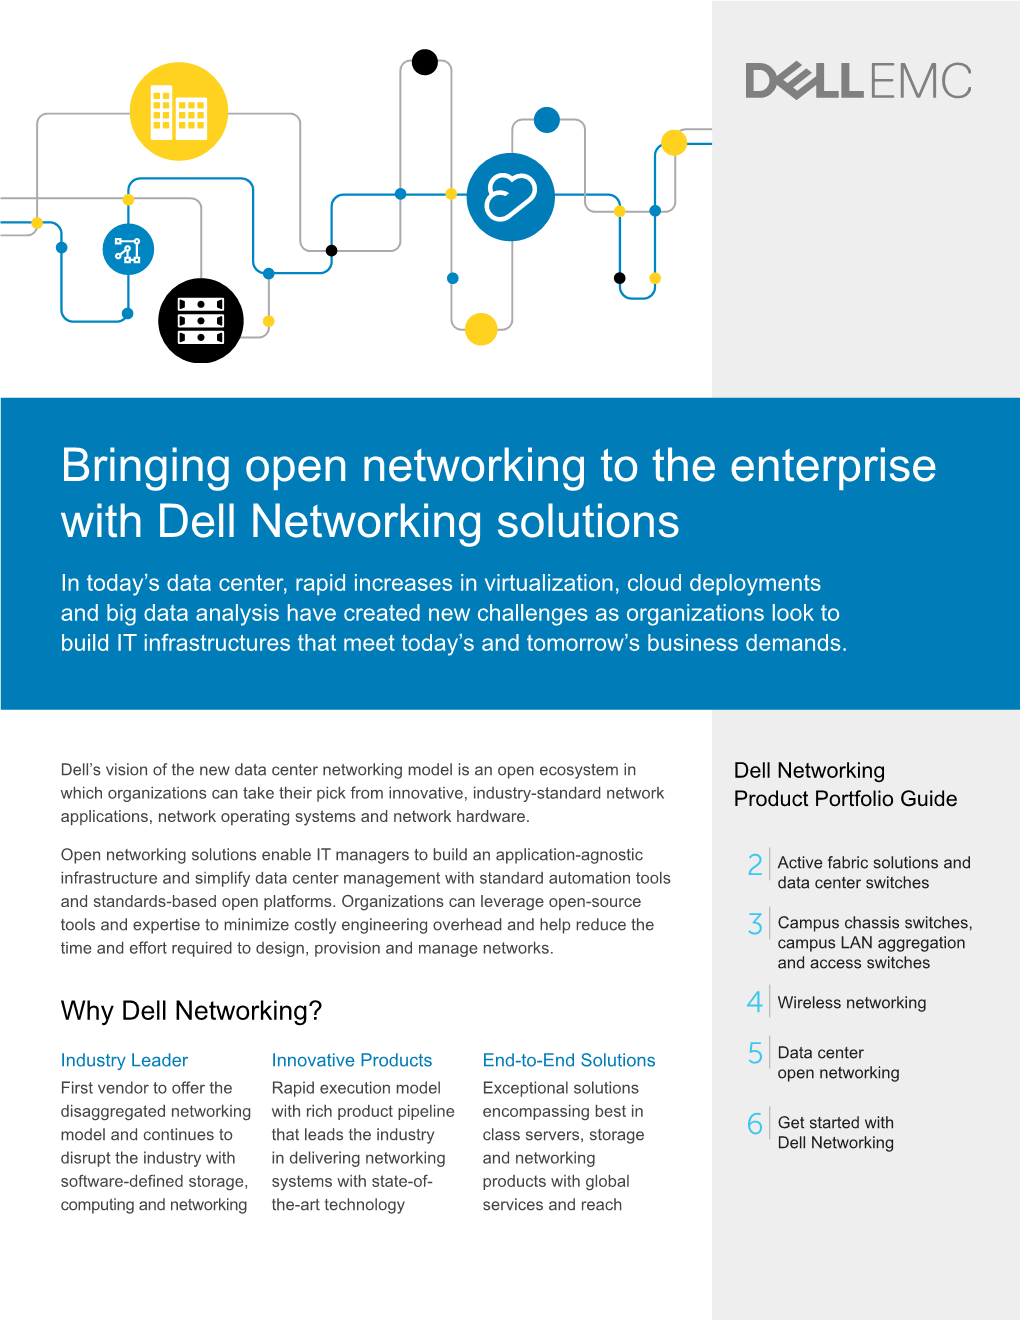 Bringing Open Networking to the Enterprise with Dell Networking